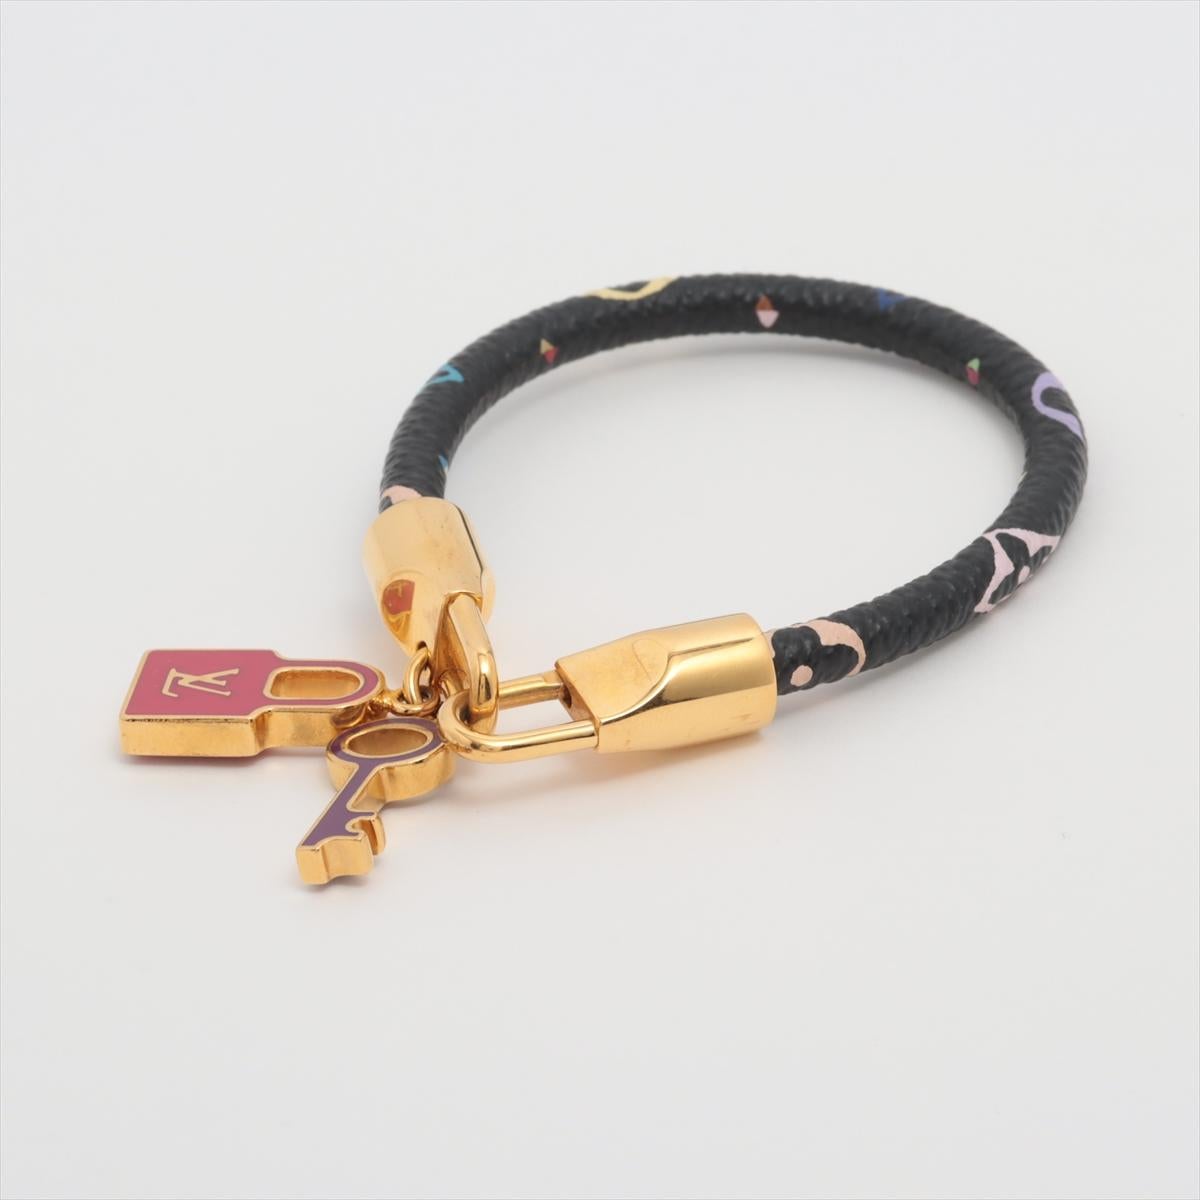 The Louis Vuitton Monogram Lock It Bracelet in Multicolor Black is a statement accessory that exudes luxury and sophistication. Crafted from the iconic Monogram canvas, the bracelet features vibrant multicolor LV initials against a sleek black